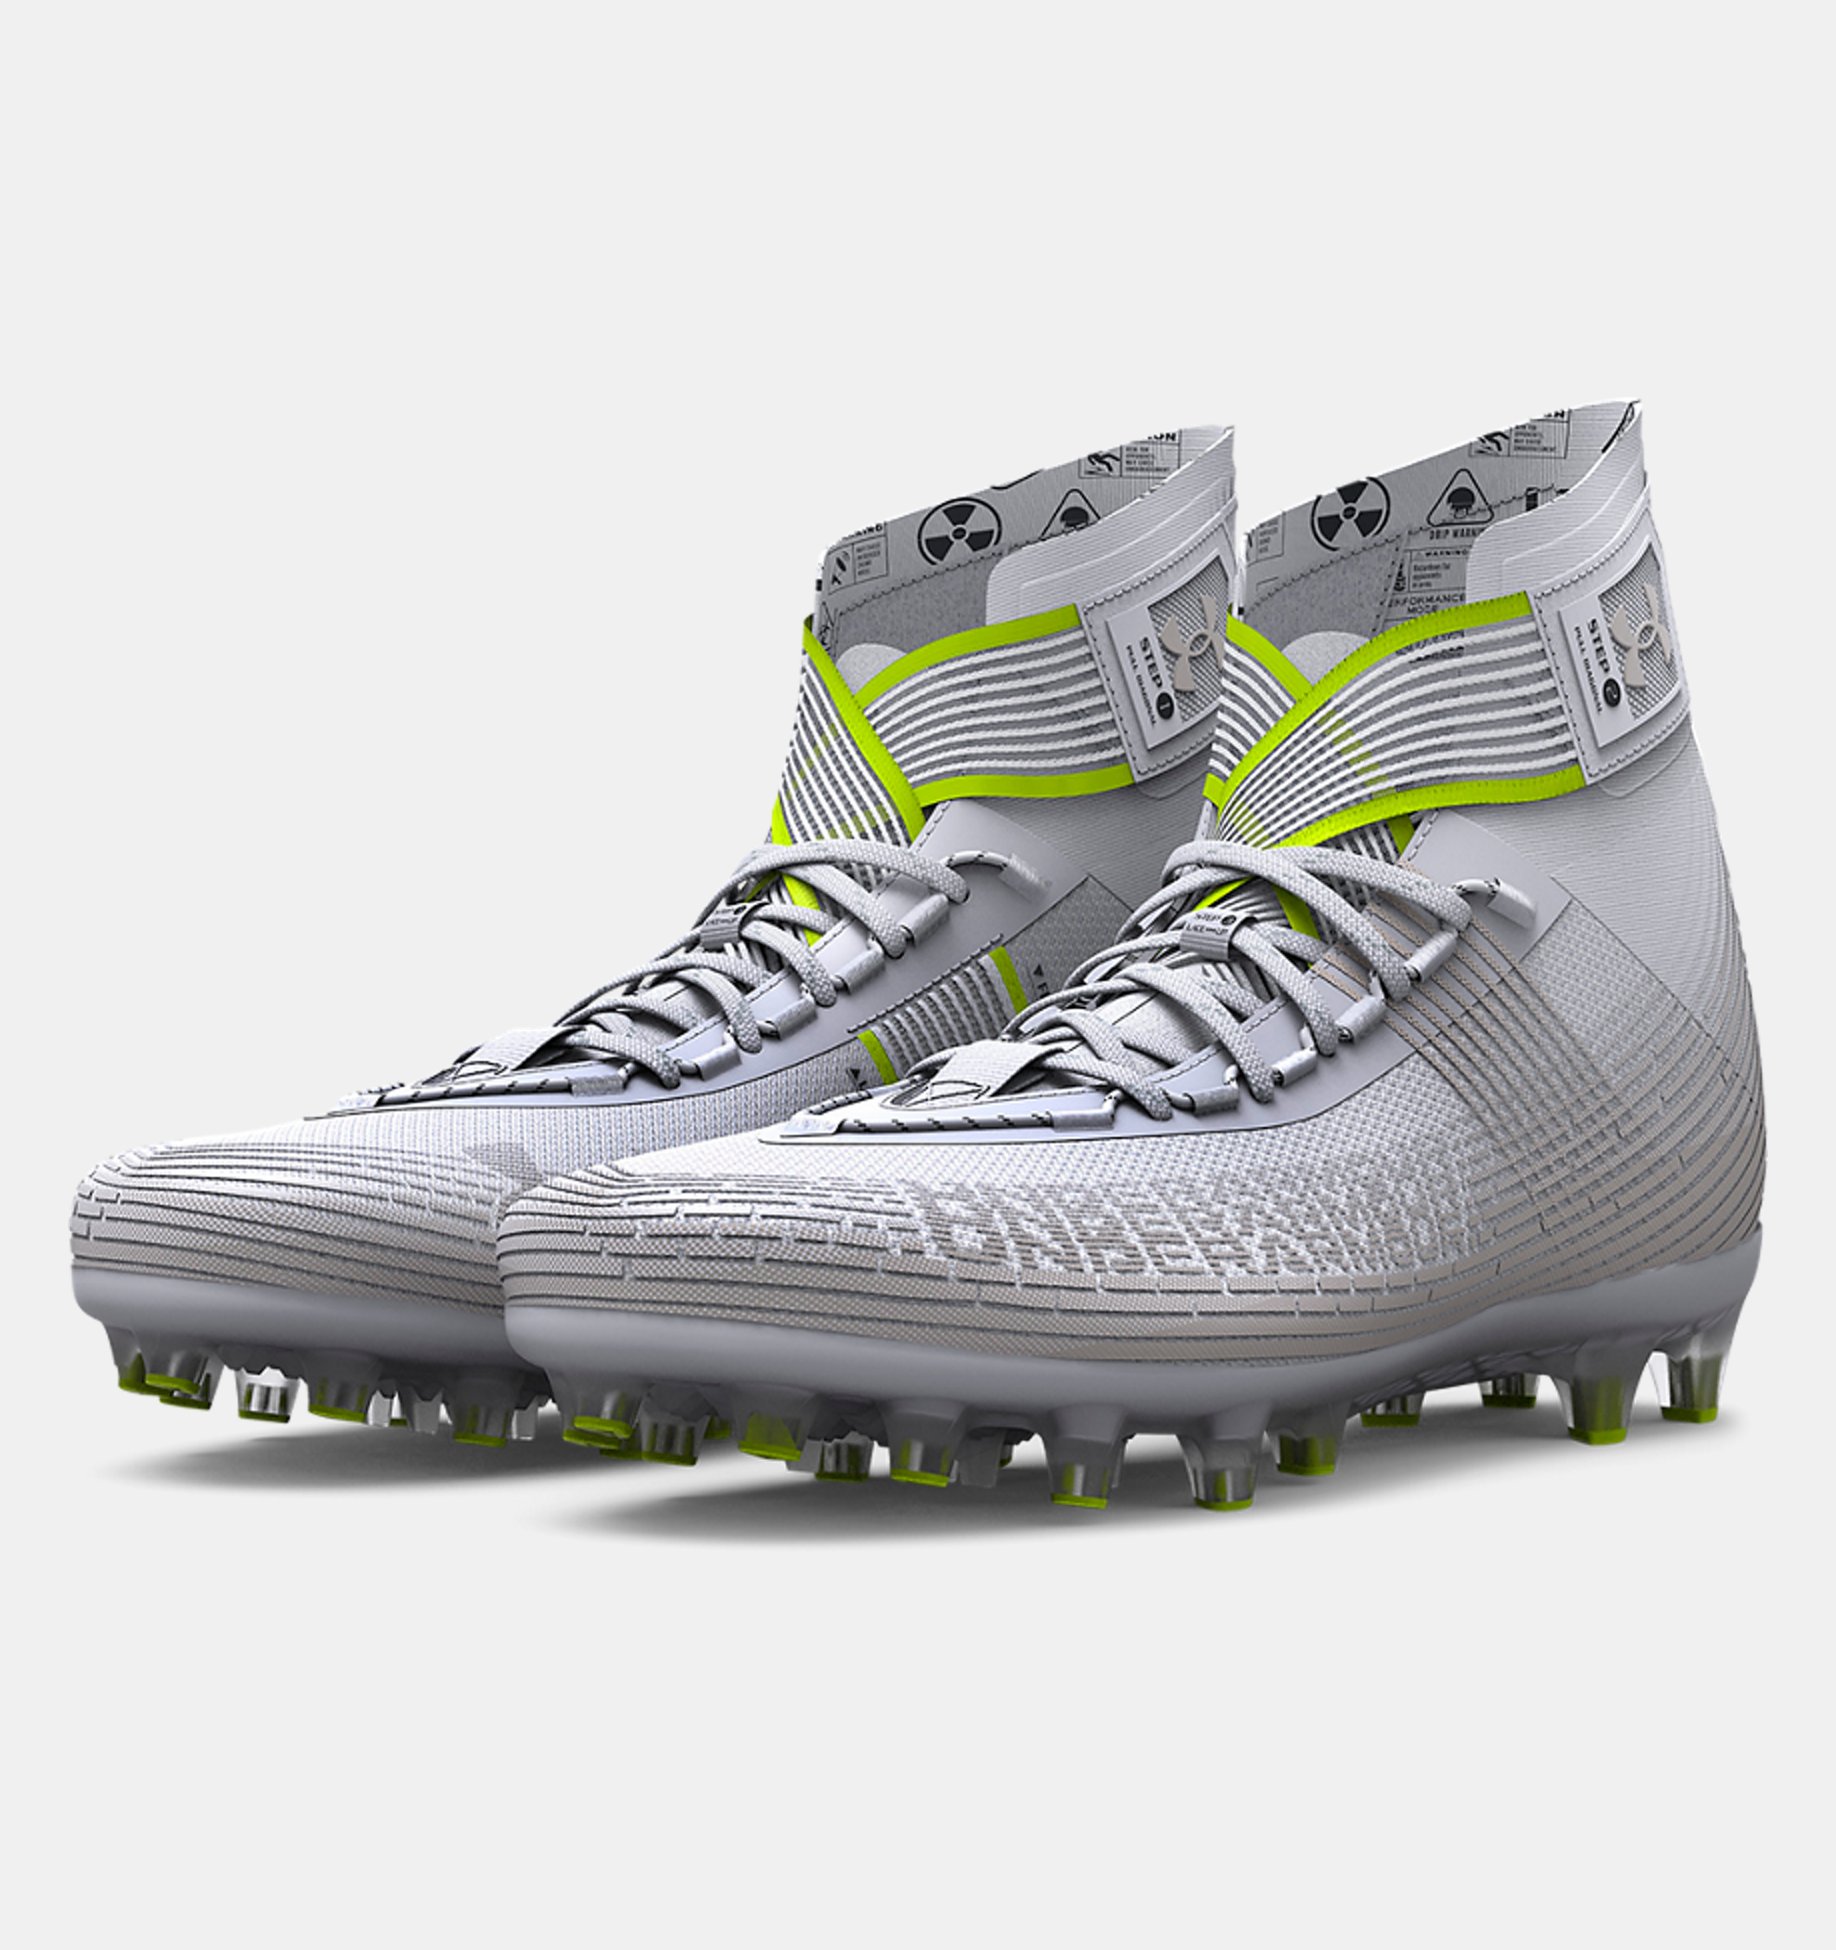 Details about   UNDER ARMOUR HIGHLIGHT MC LE FOOTBALL CLEATS 3020267-101 MSRP $140 